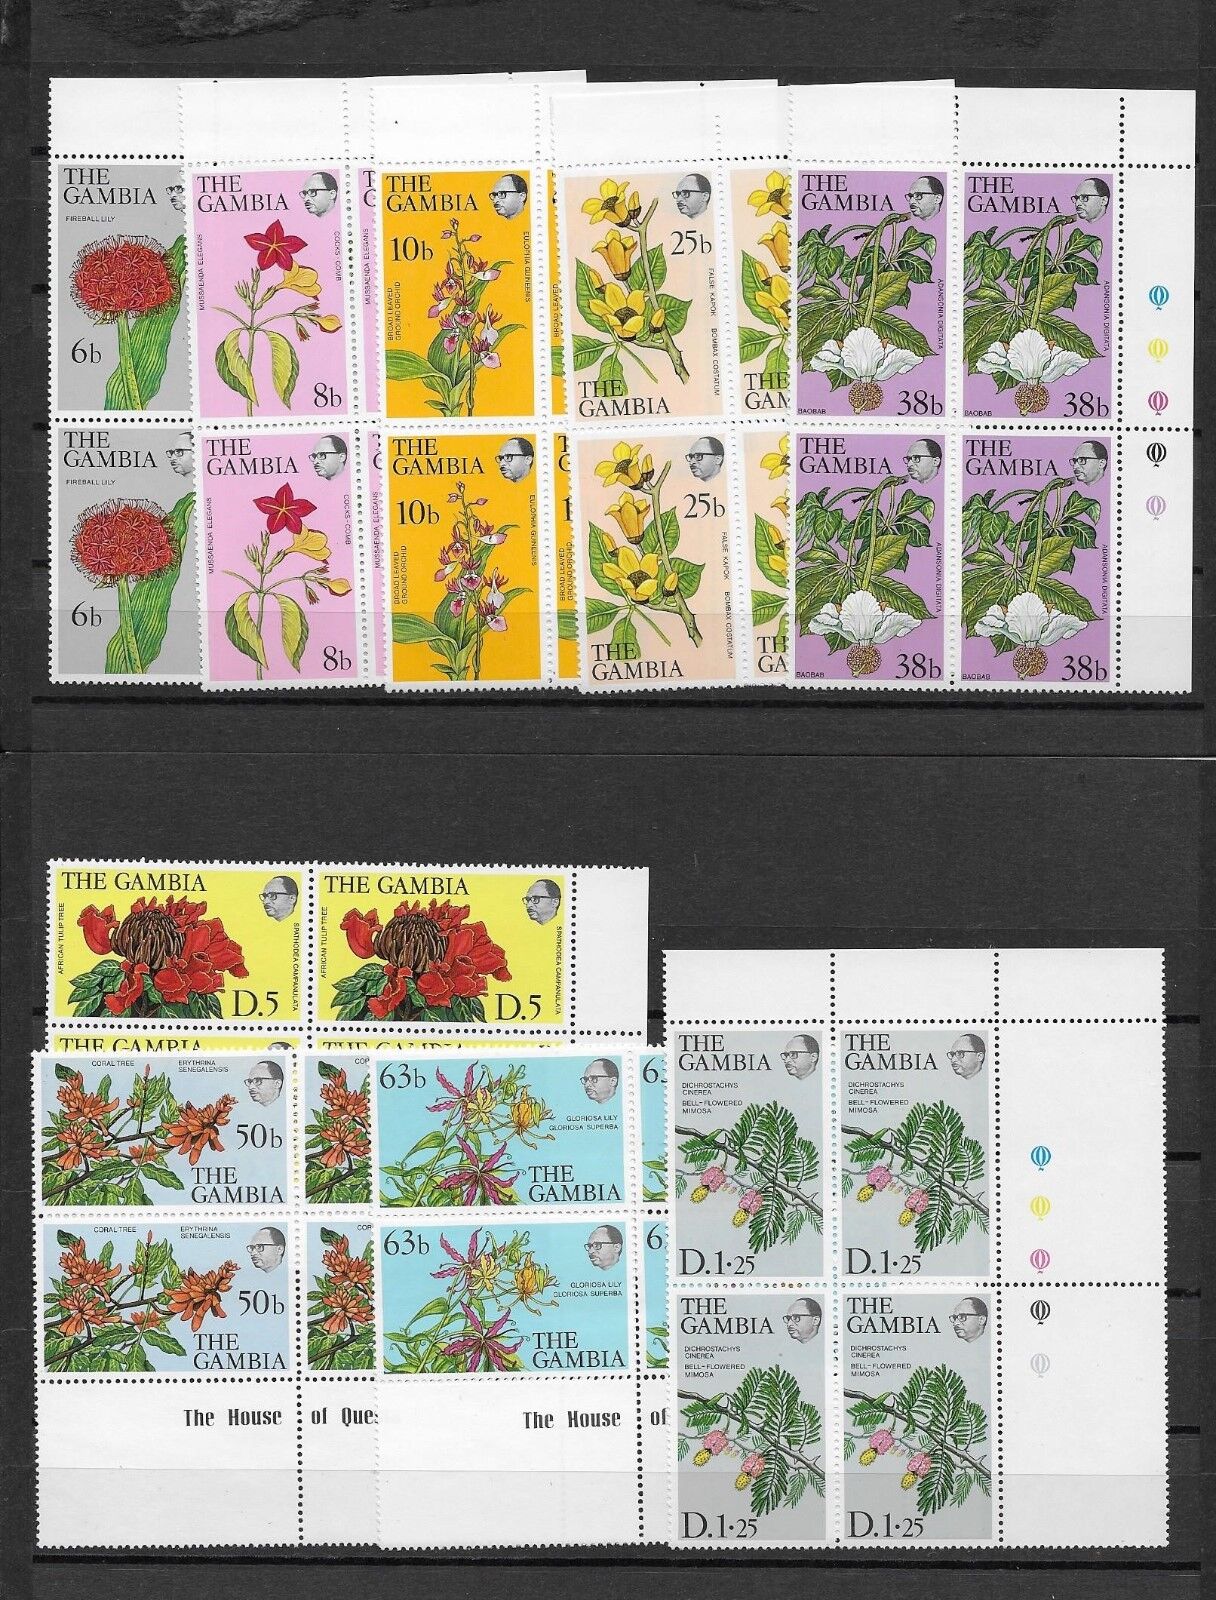 GAMBIA 1977 MNH REPRINTS IN 9 BLOCKS OF 4 FLOWERS CLERODENDRUM SPLENDENS Без бренда